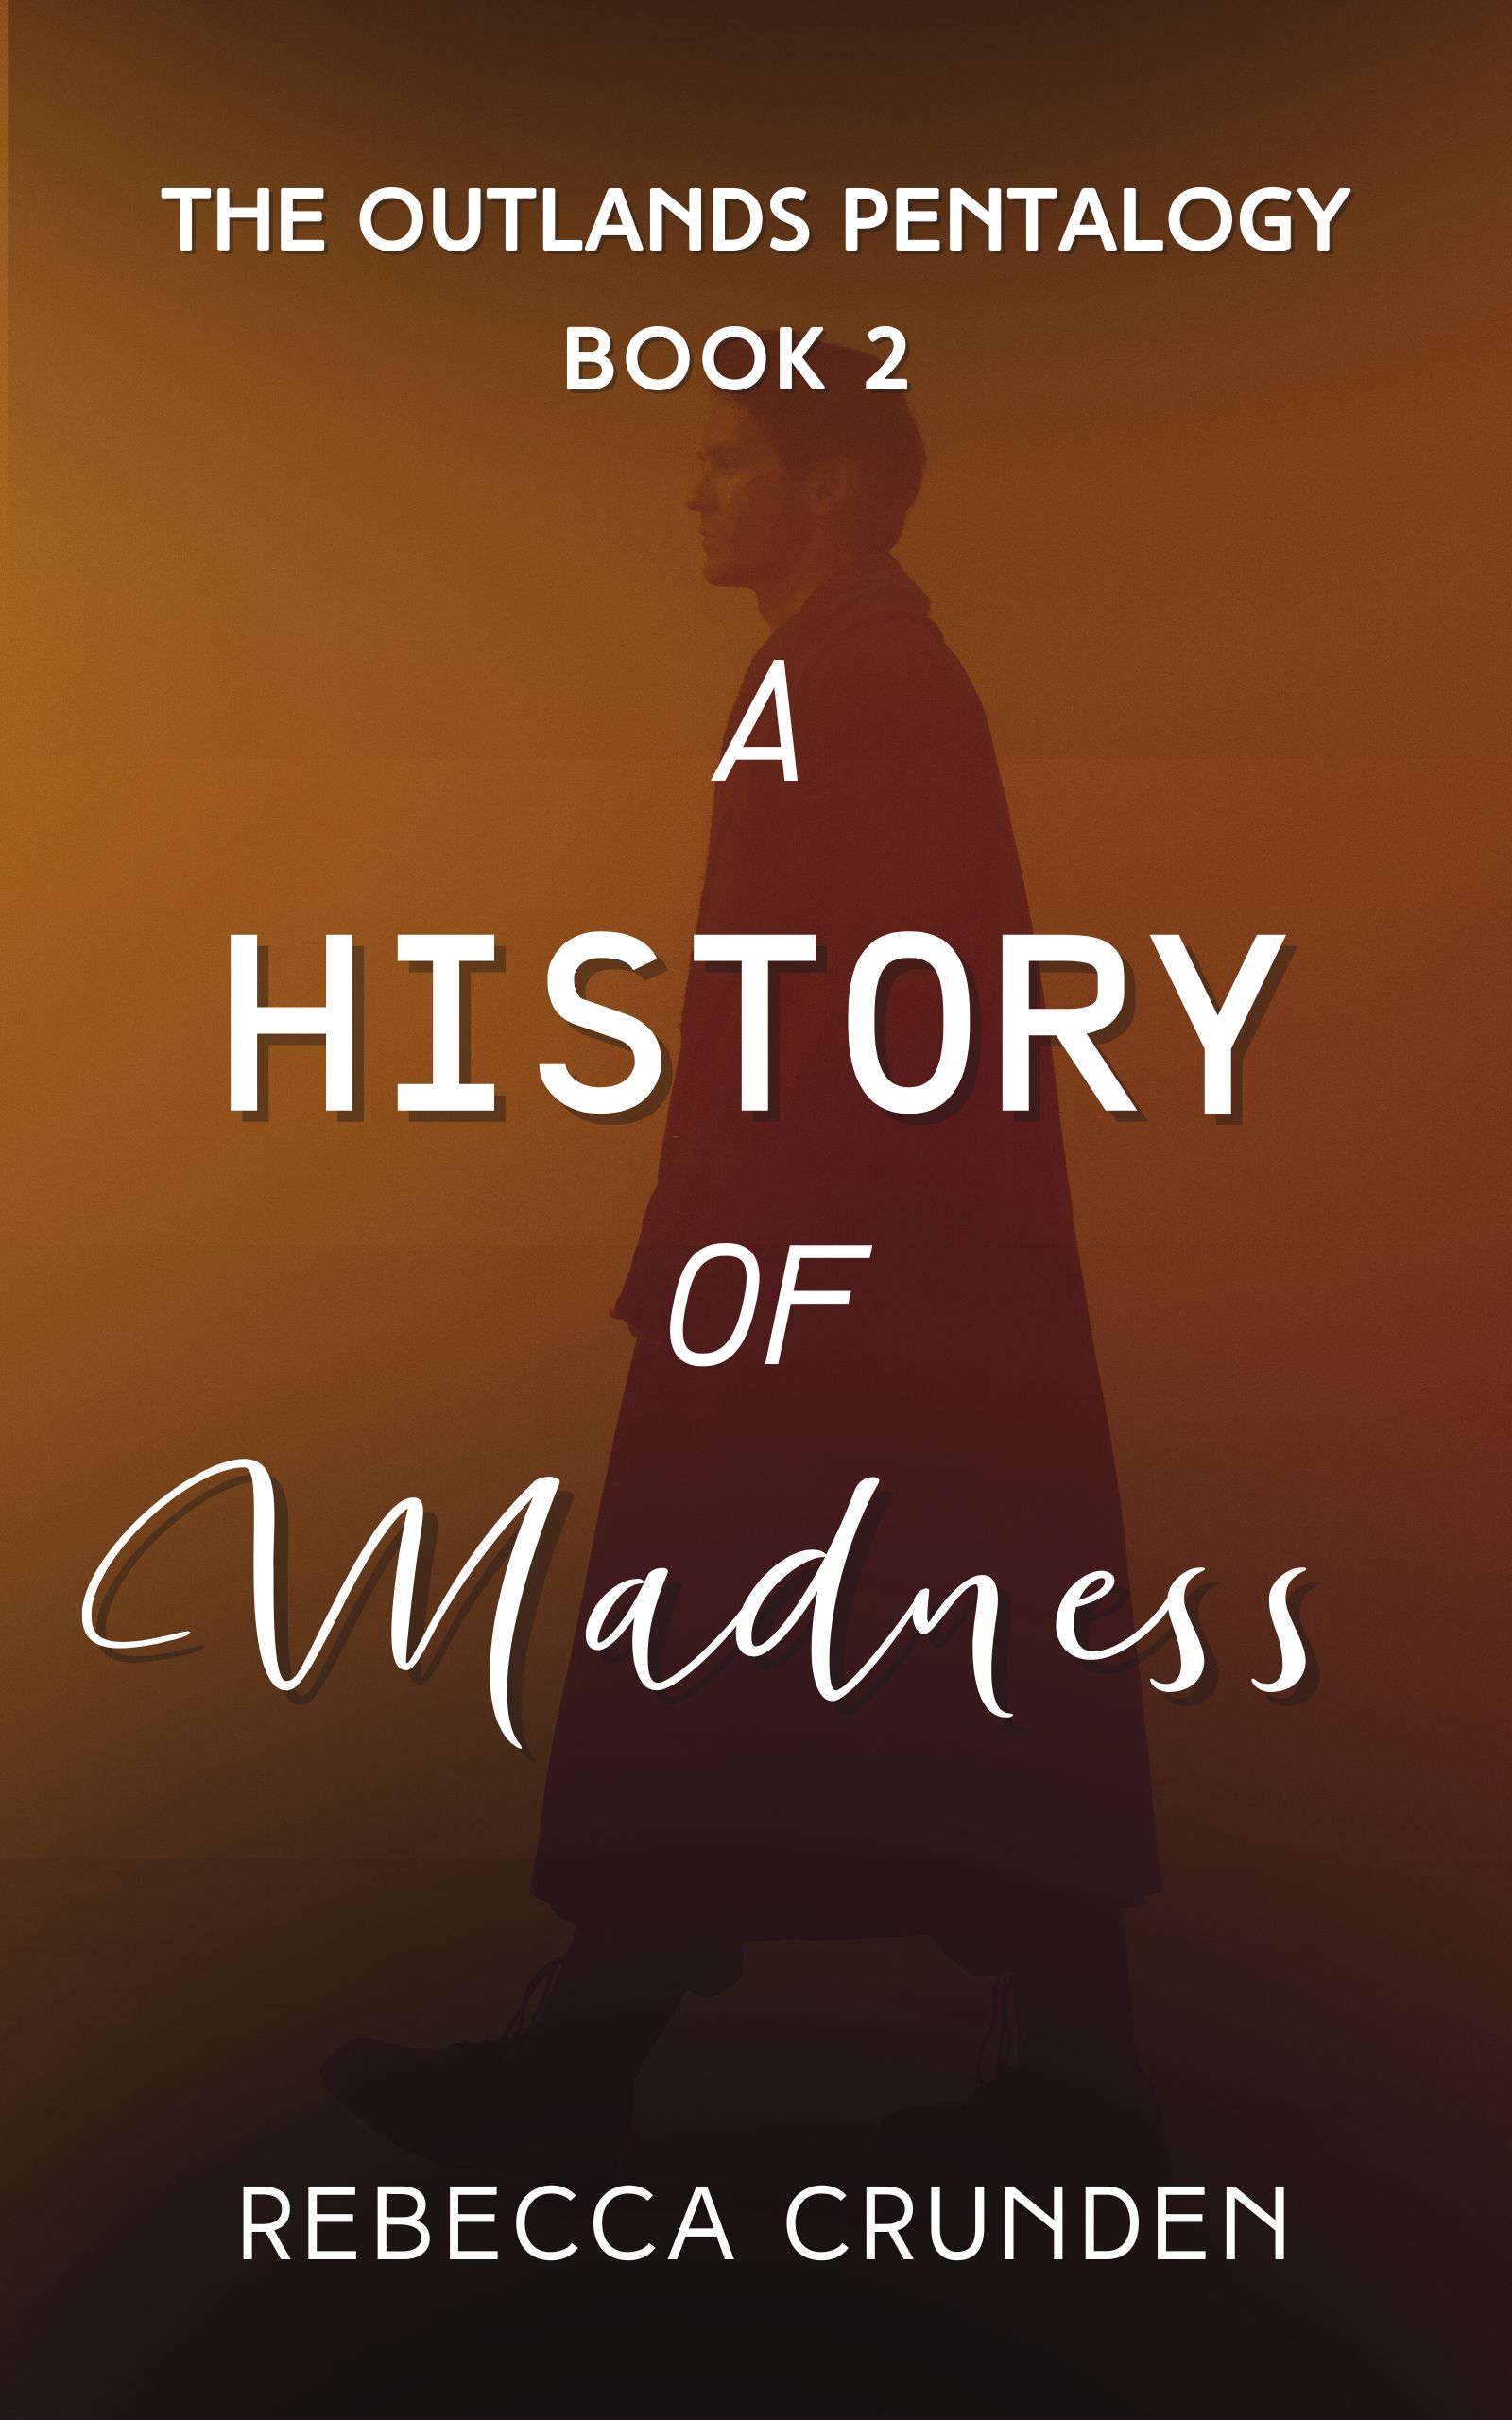 Cover of Rebecca Crunden's novel A History of Madness